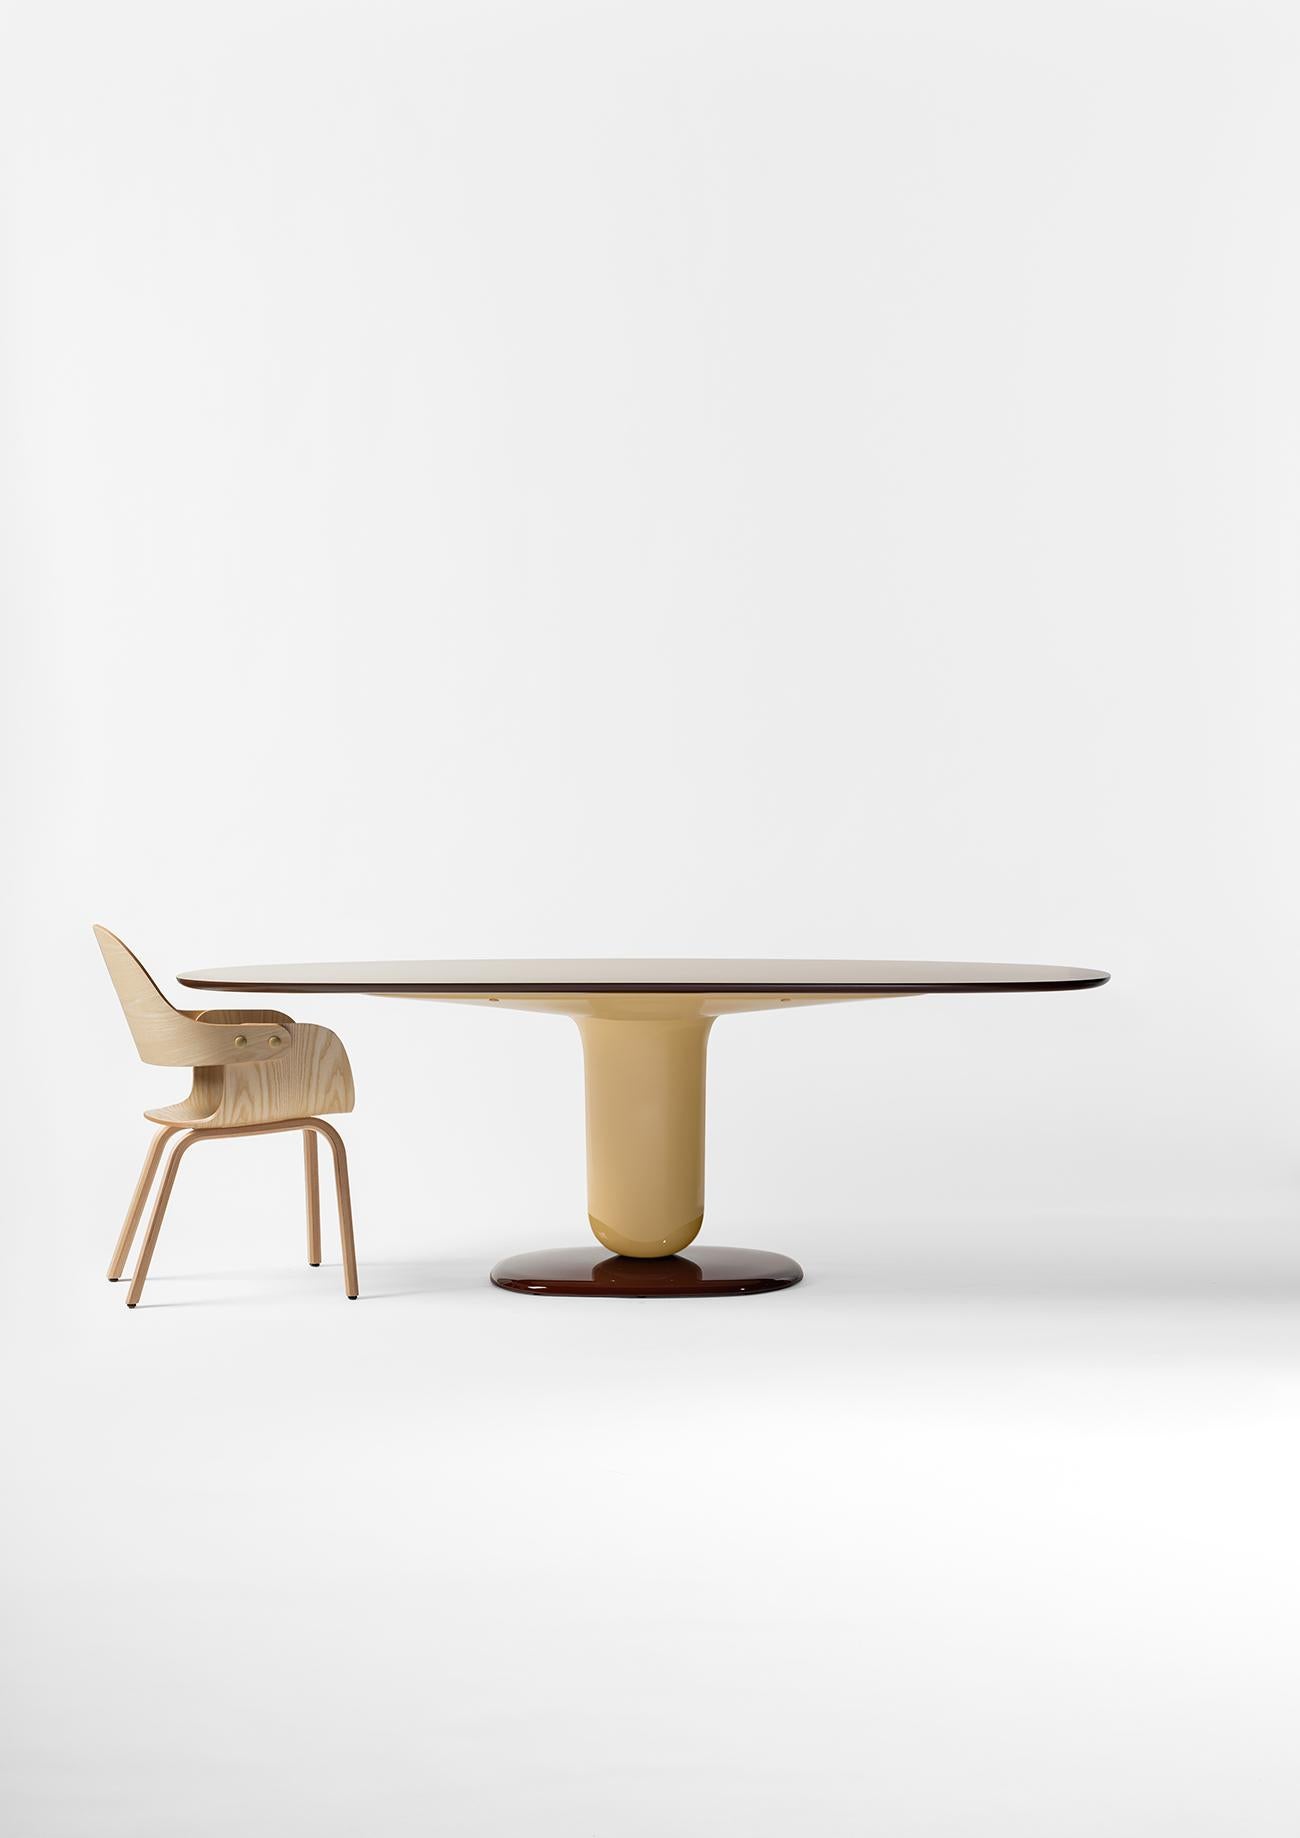 Modern Dining Table Chesnut brown and Biege Gloss Lacquered Fibreglass by Jaime Hayon